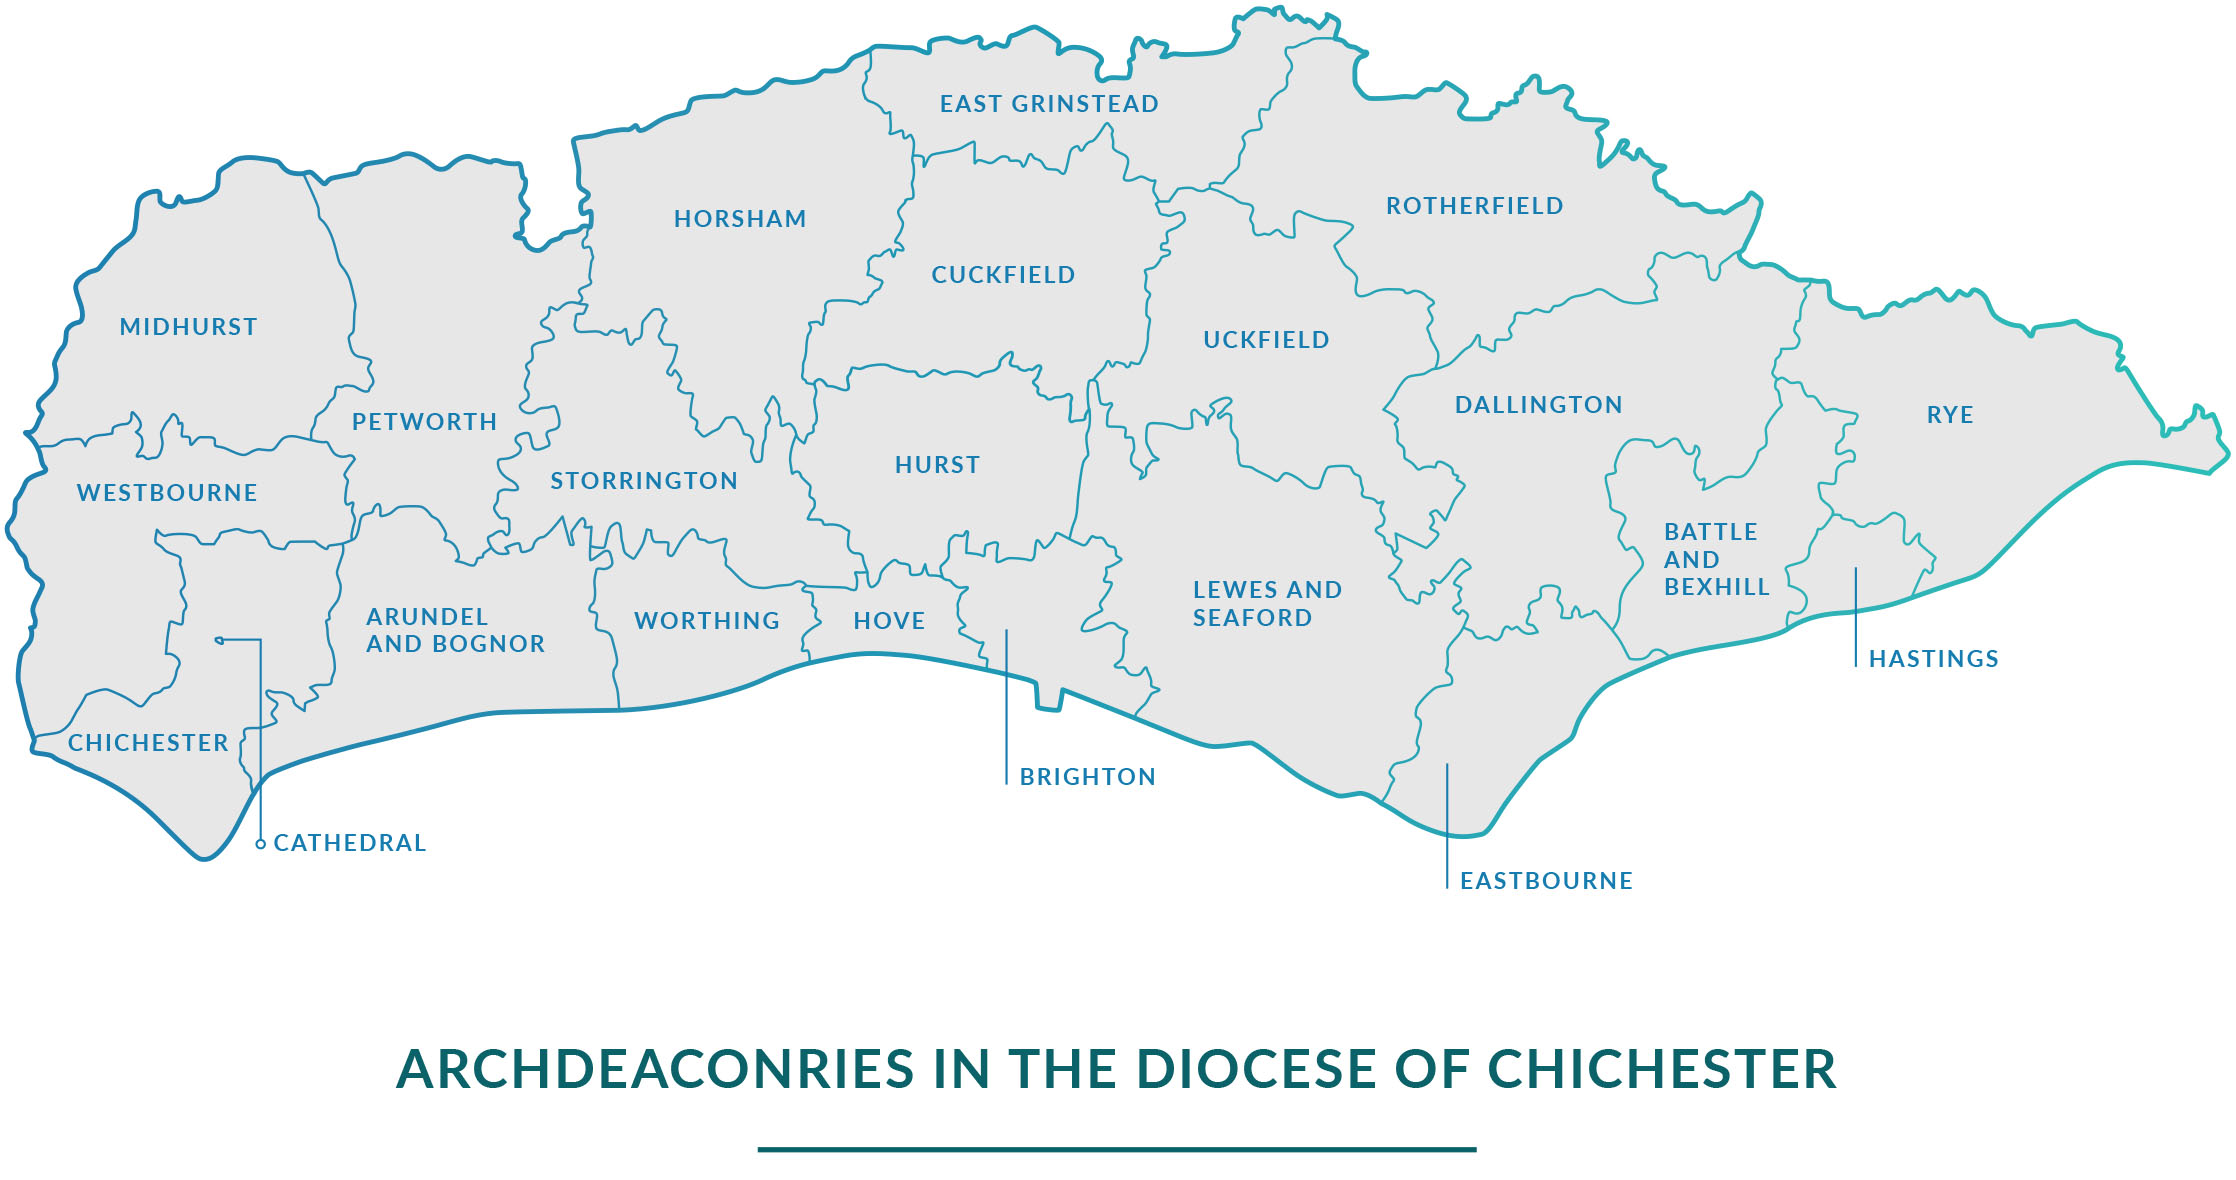 Map of the Diocese of Chichester, delineated into its archdeaconries